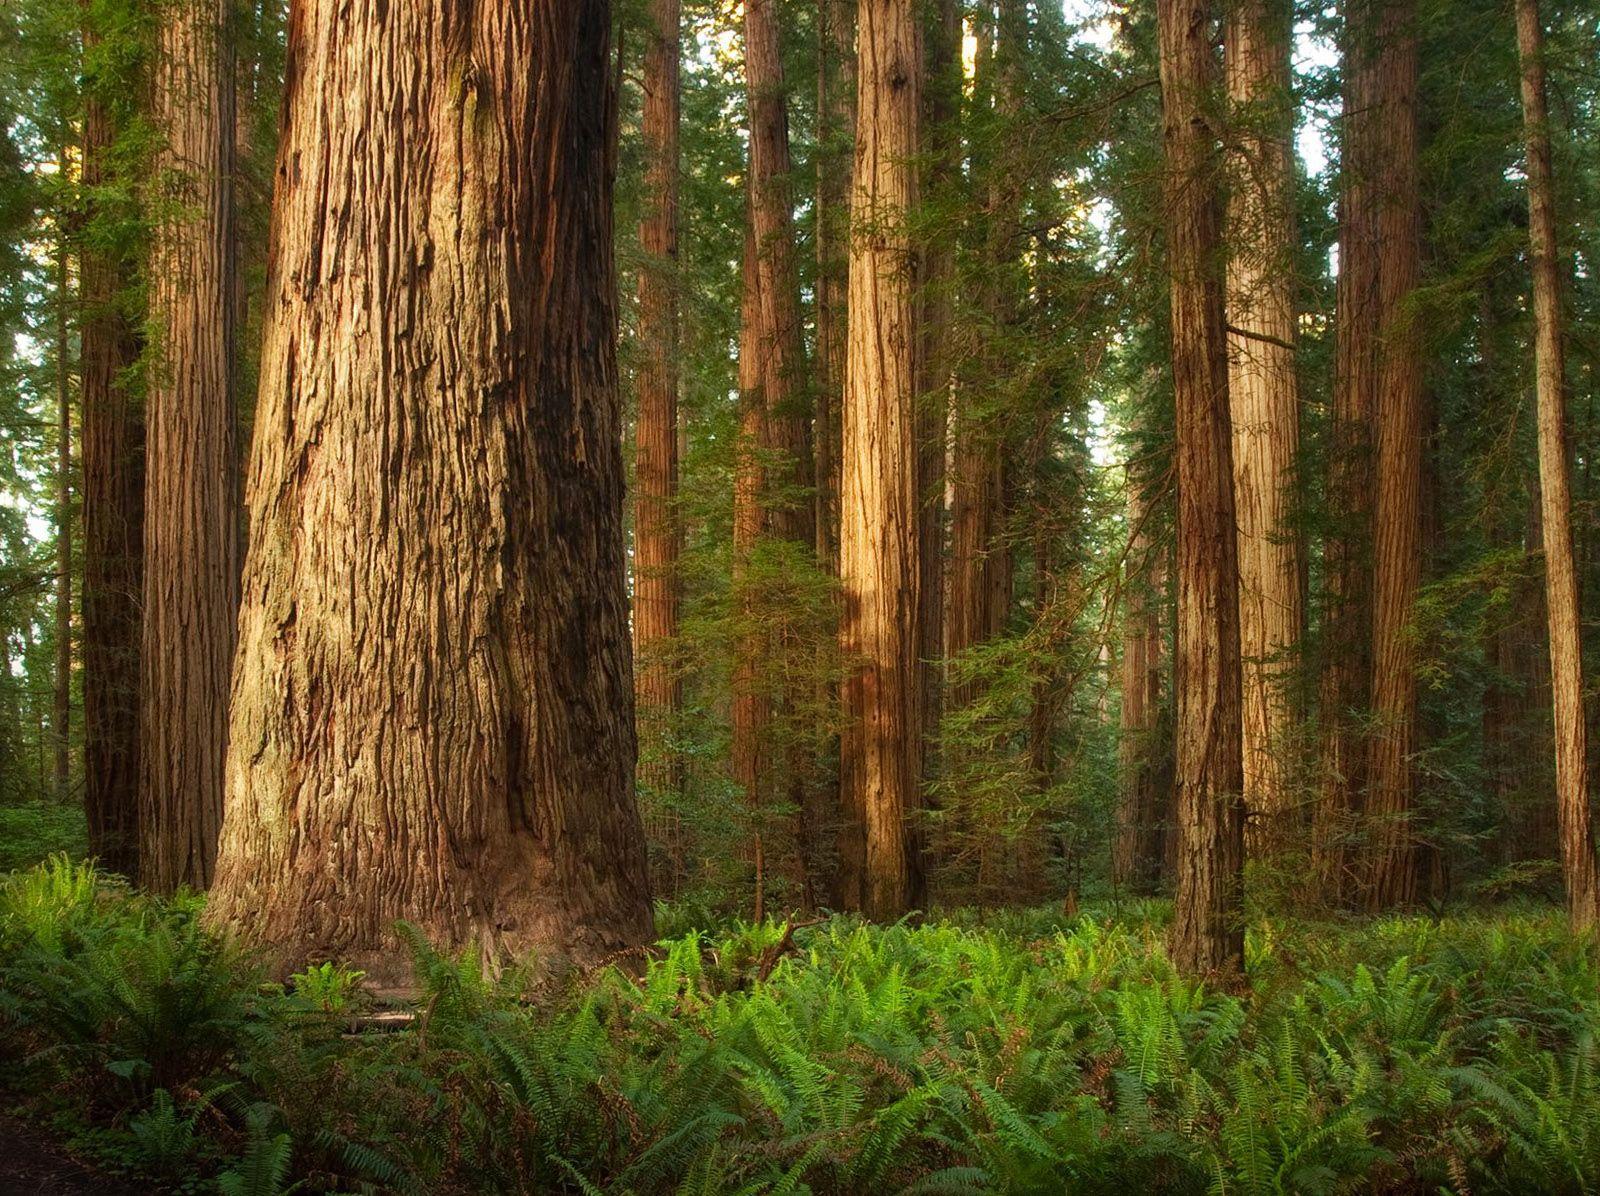 Amazing HD wallpaper of Redwood forests to calm your desktop. HD